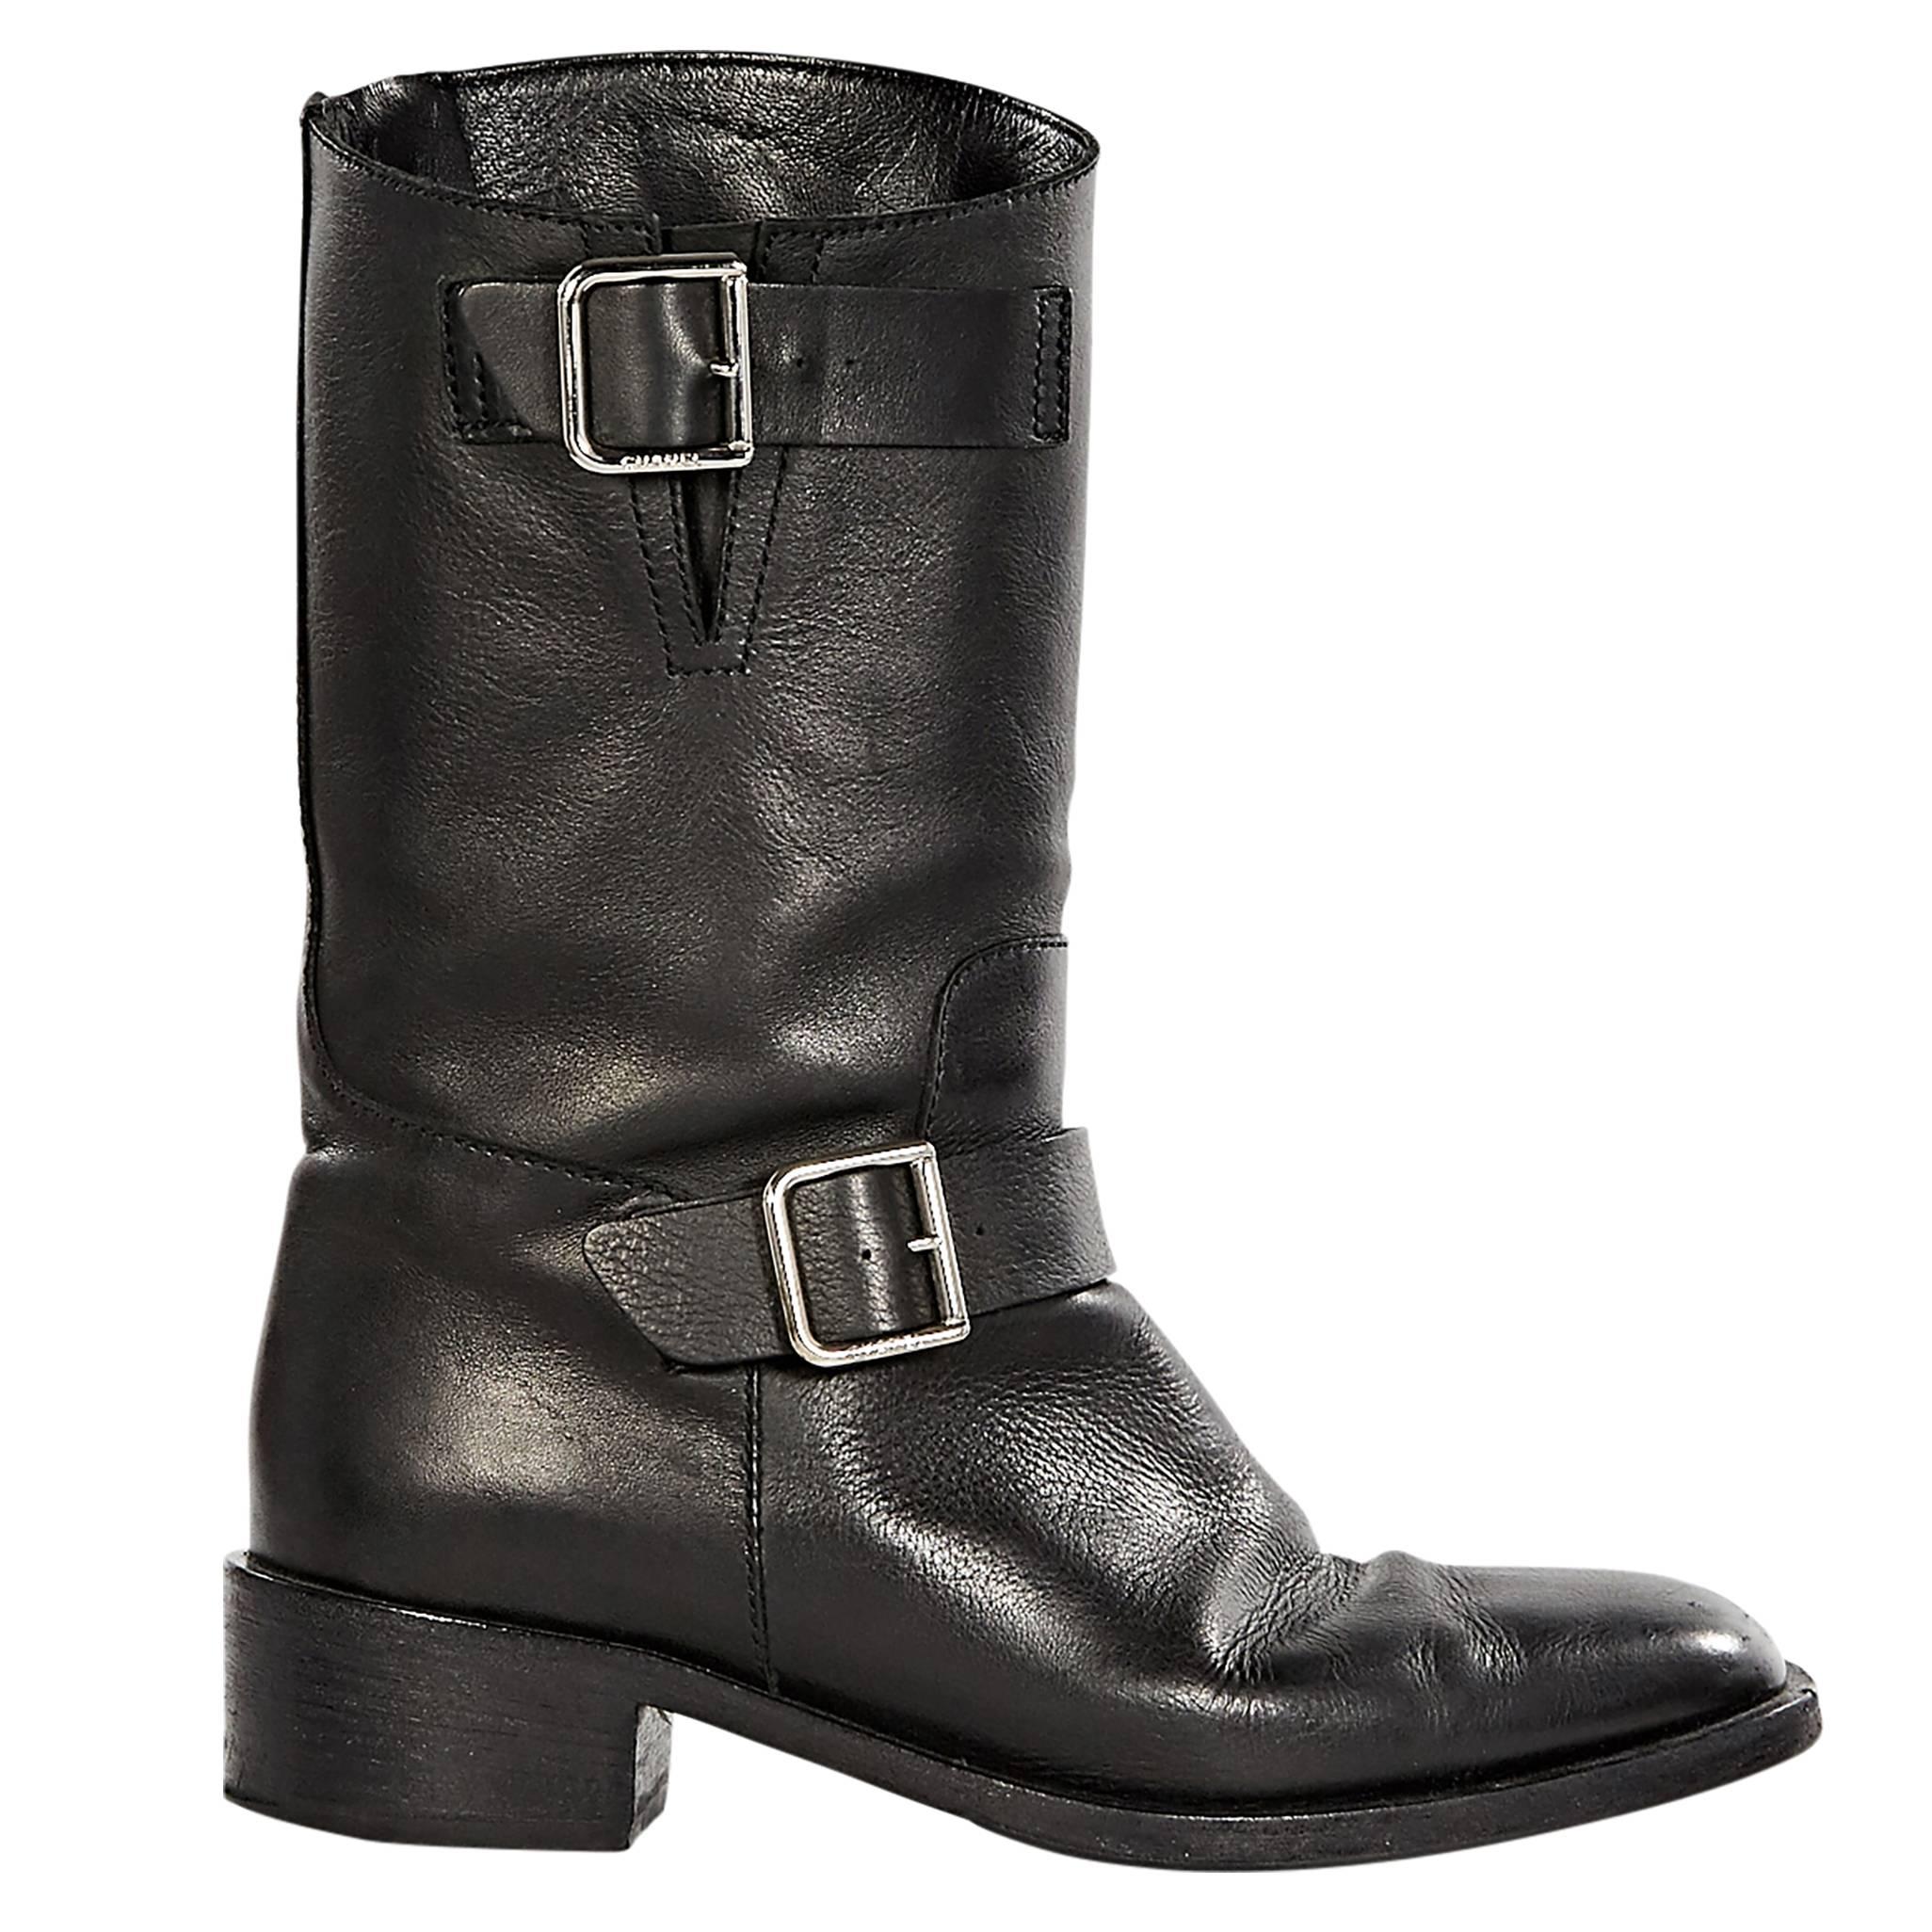 Black Chanel Leather Moto Boots